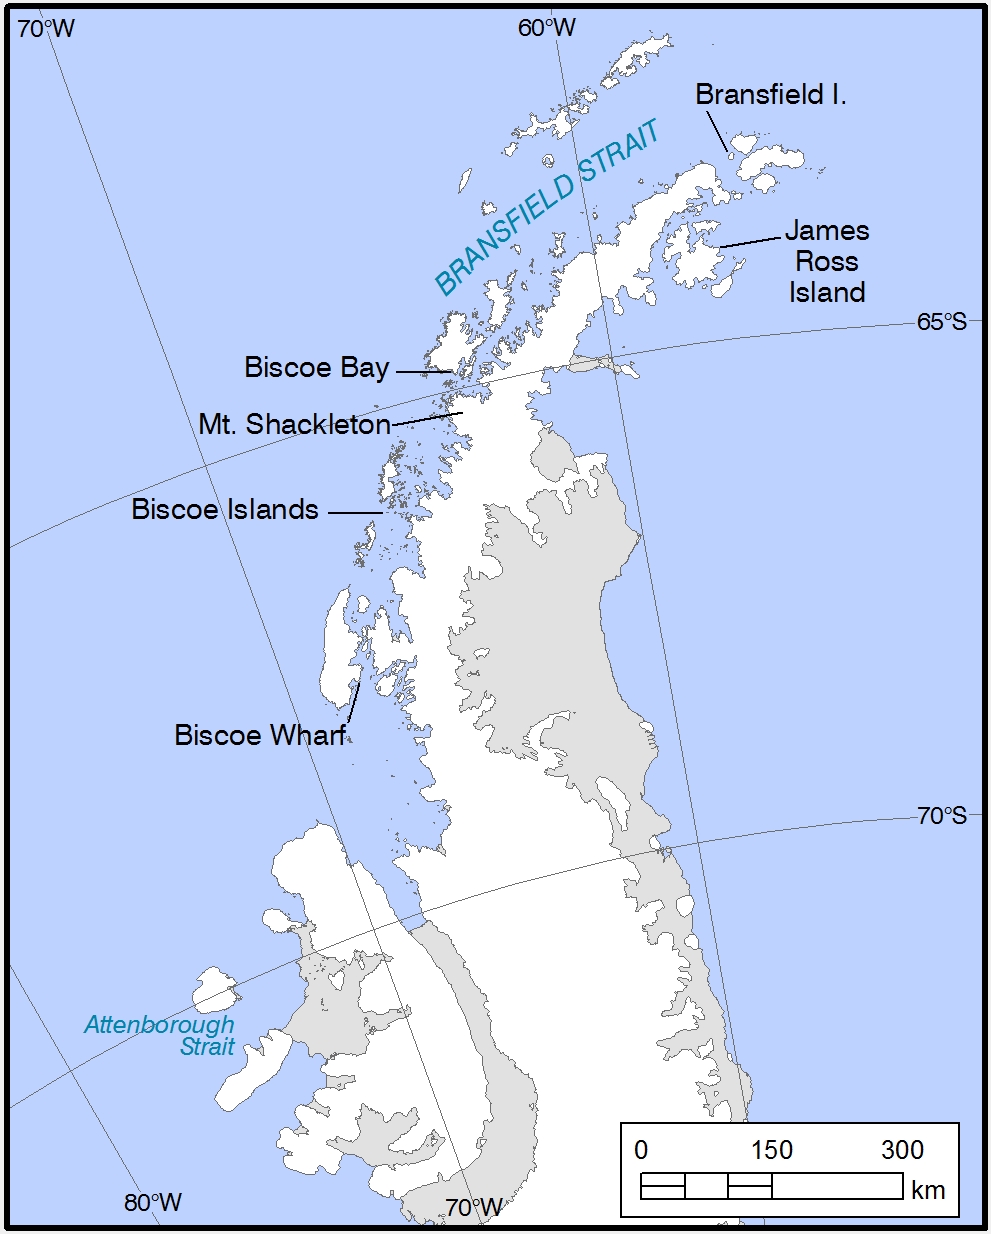 Names of BAS Research Vessels, noted in Antarctic Place names.